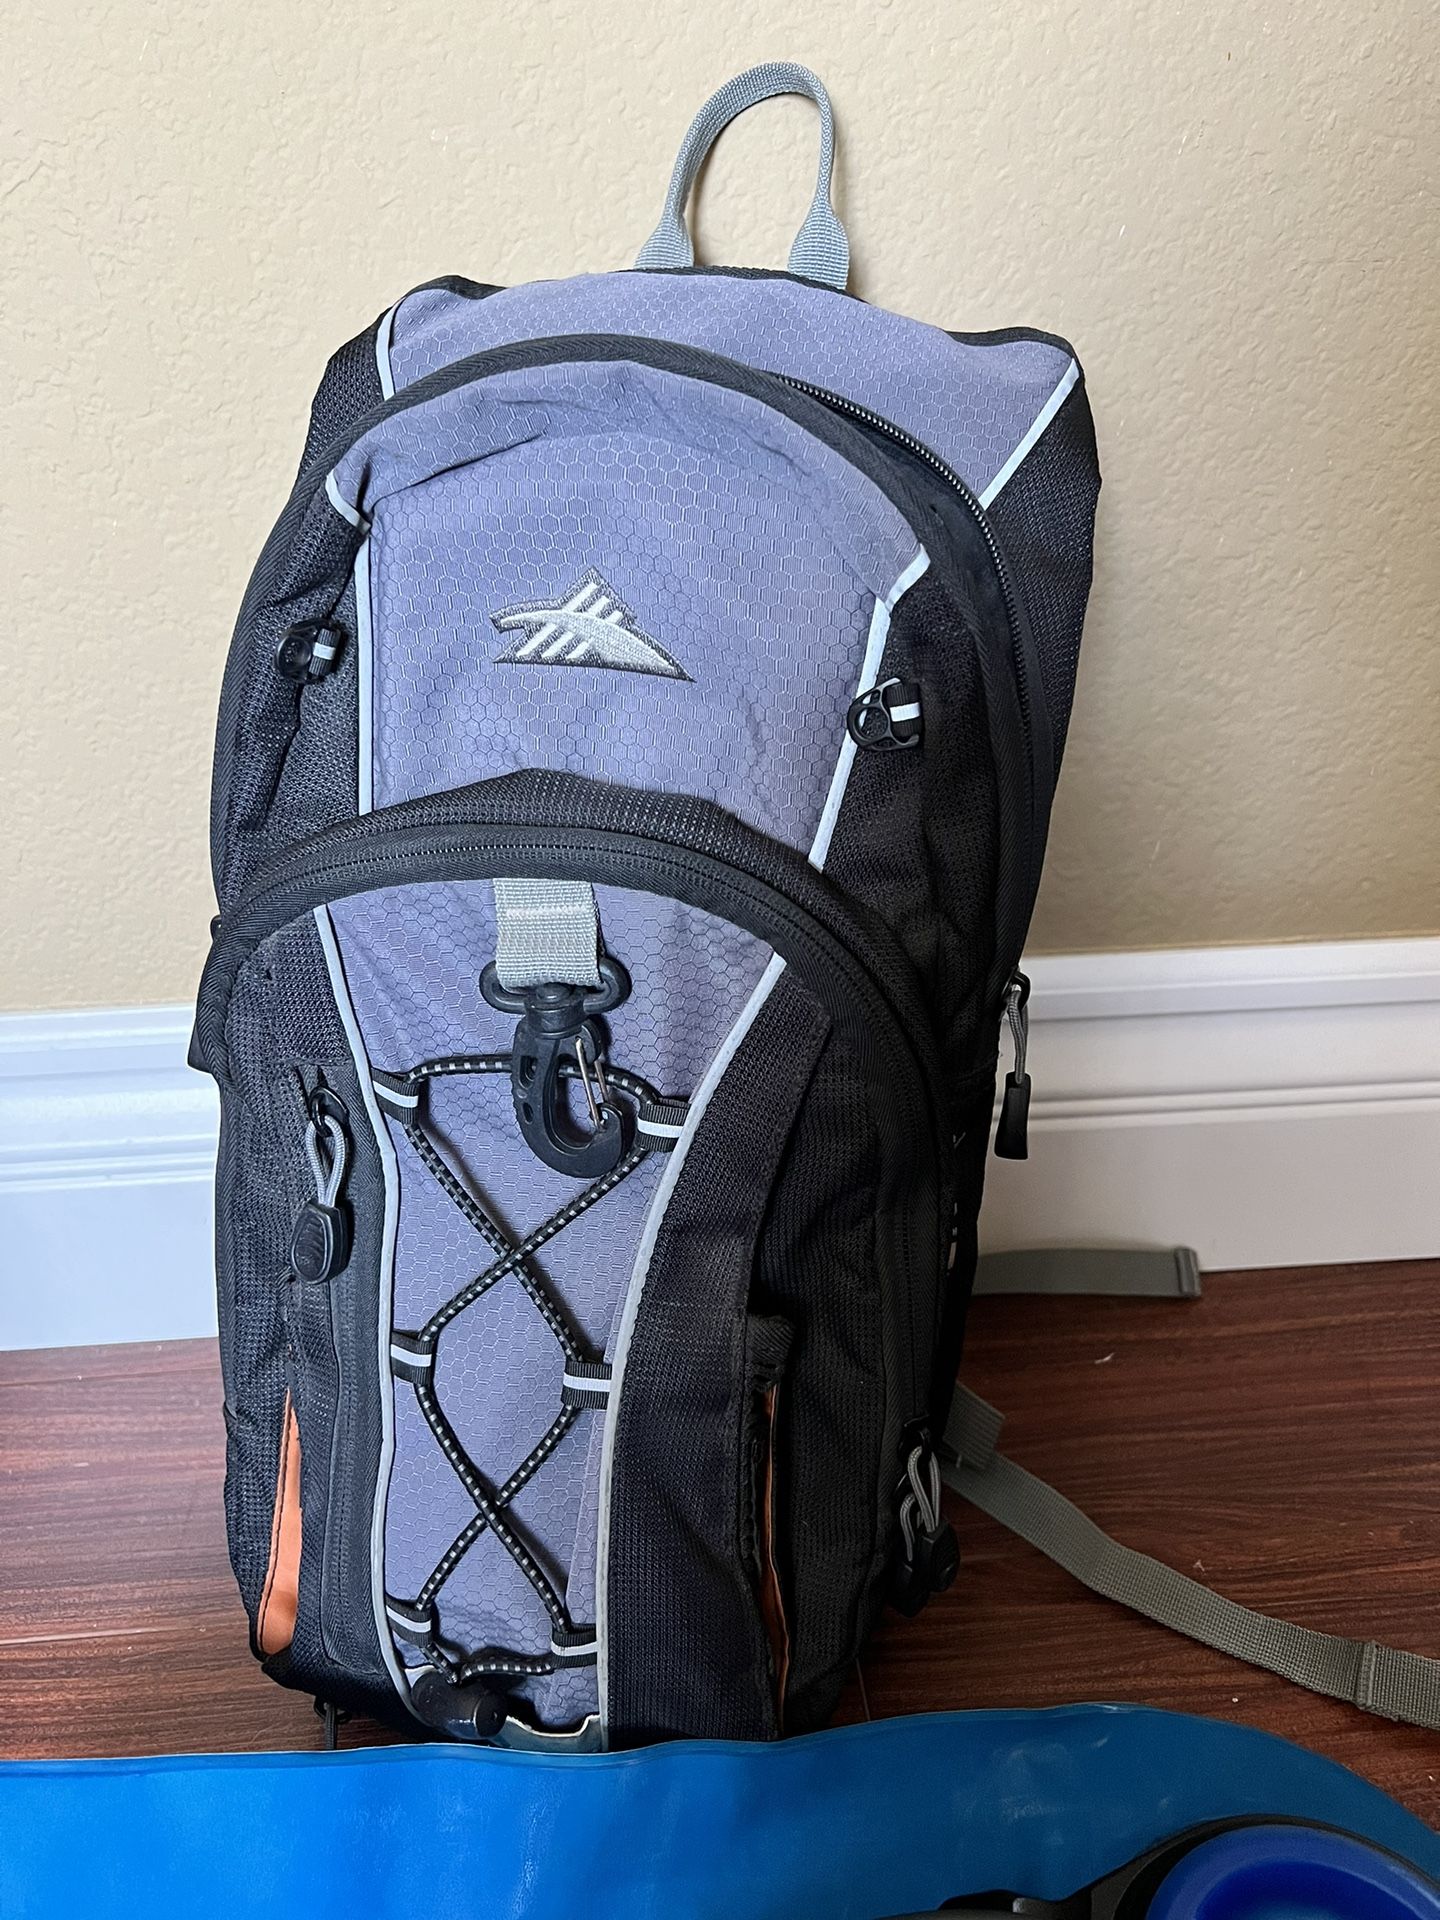 Hydration Backpack And Brand New Hydration Camelpak Bladder